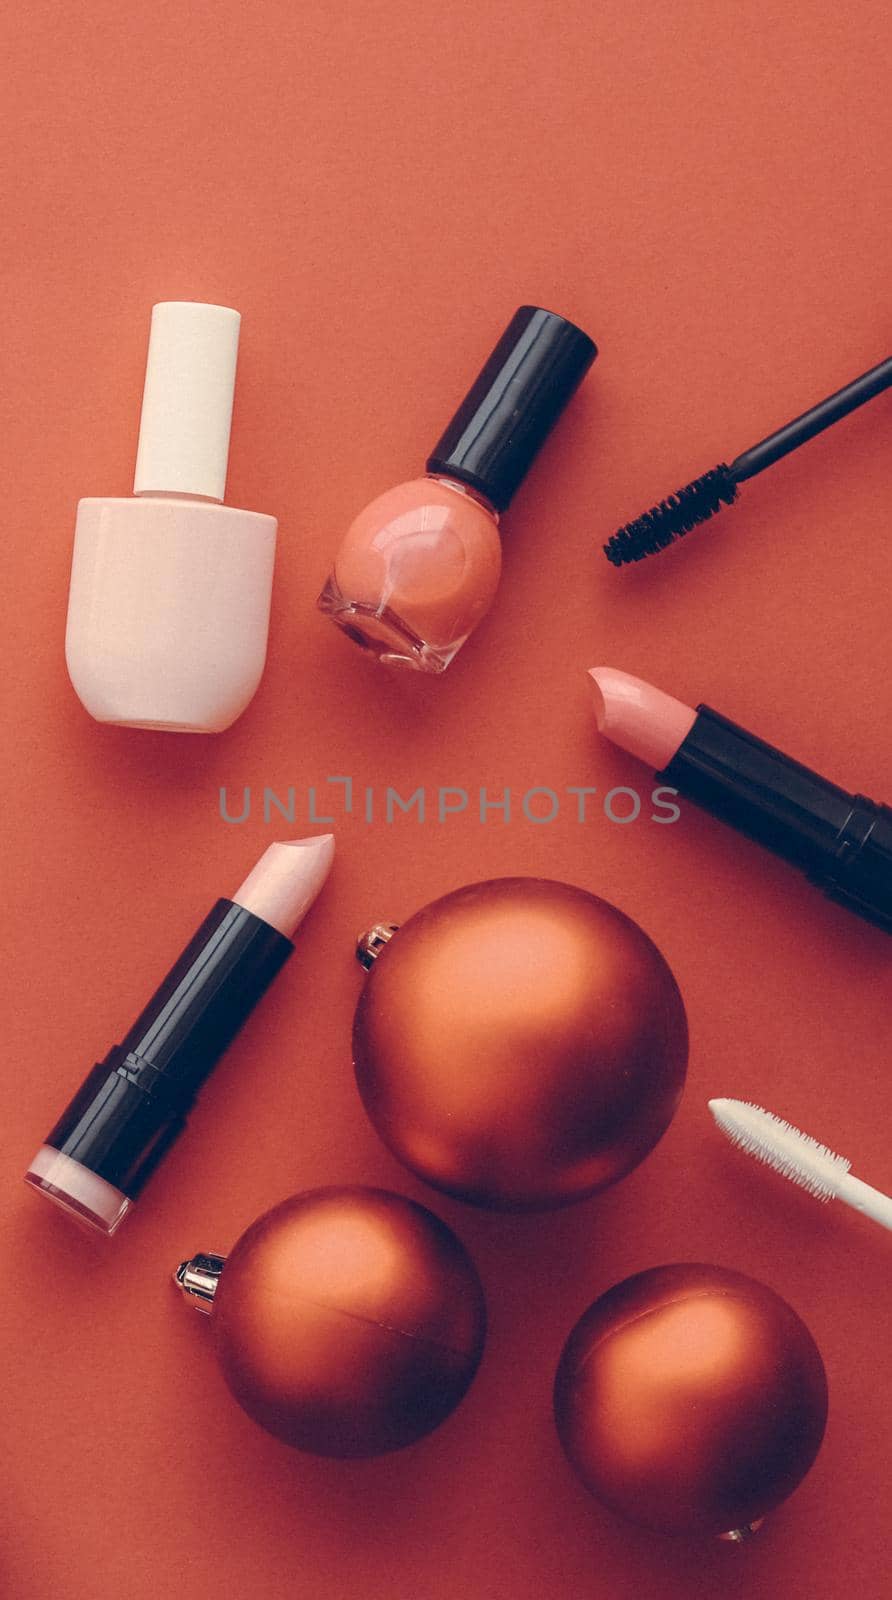 Cosmetic branding, fashion blog cover and girly glamour concept - Make-up and cosmetics product set for beauty brand Christmas sale promotion, vintage orange flatlay background as holiday design